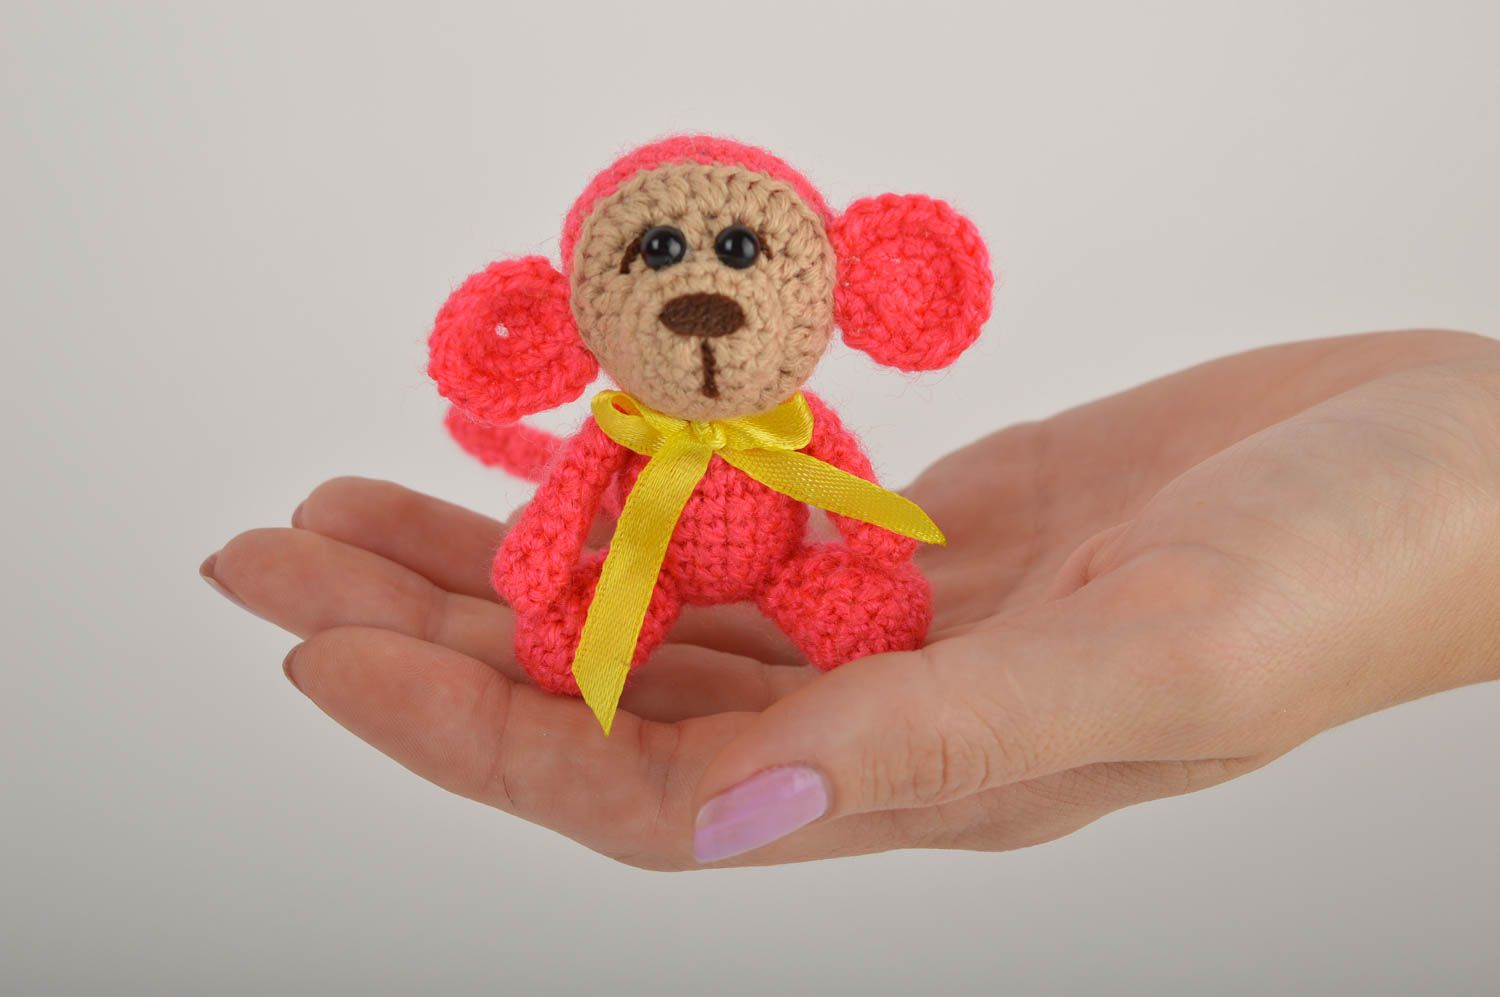 Crocheted handmade toys decorative soft toys for children stuffed toys for baby photo 5